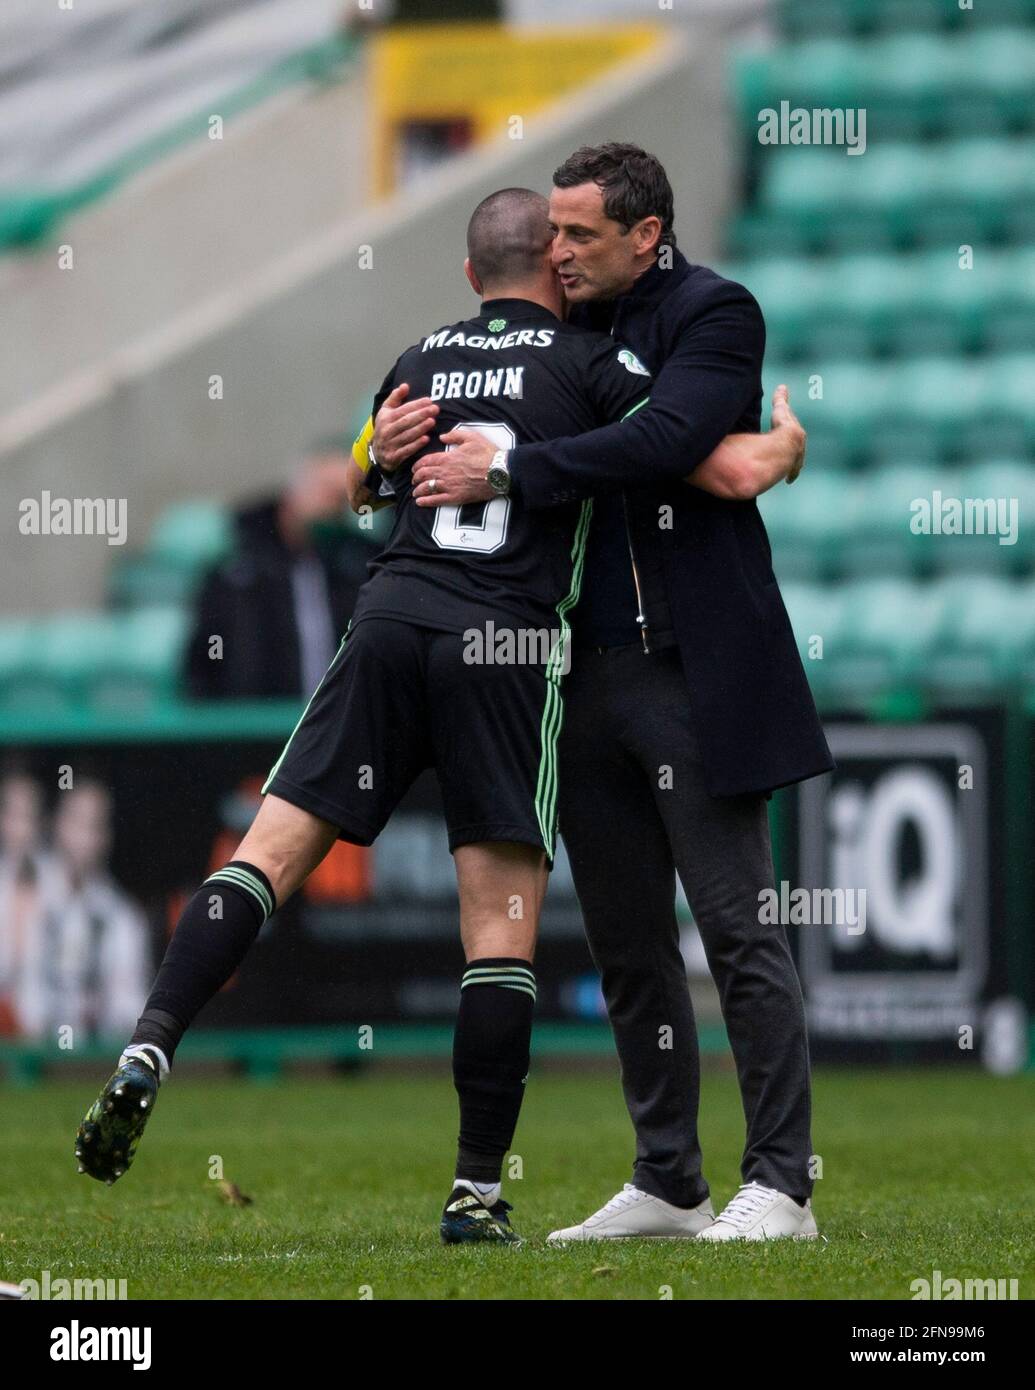 Scottish Premiership - Hibernian v Celtic. Easter Road Stadium, Edinburgh, Midlothian, UK. 15th May, 2021. Hibs play host to Celtic in the Scottish Premier League at Easter road, Edinburgh. Pic shows: HibsÕ Manager, Jack Ross, gives Celtic midfielder, Scott Brown, a sporting hug as he leaves the field after playing his last game for the Parkhead side. Credit: Ian Jacobs/Alamy Live News Stock Photo